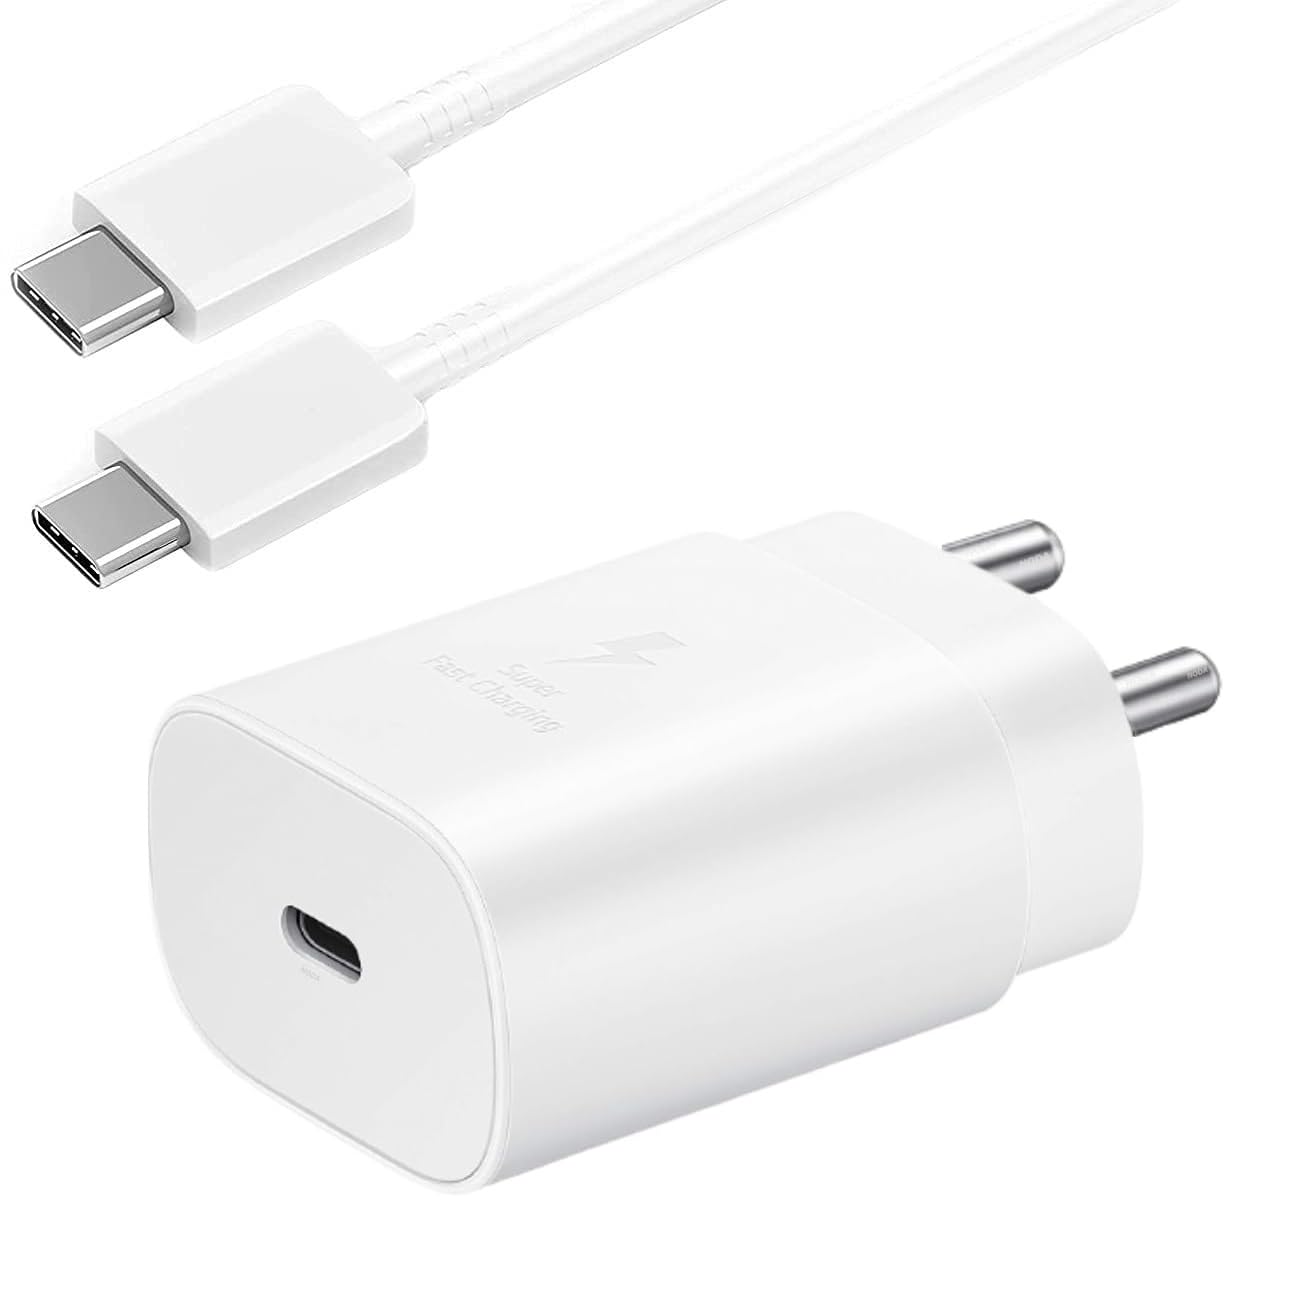 Samsung Galaxy F15 5G 25W Type-C To Type-C Adaptive Fast Mobile Charger With Cable White